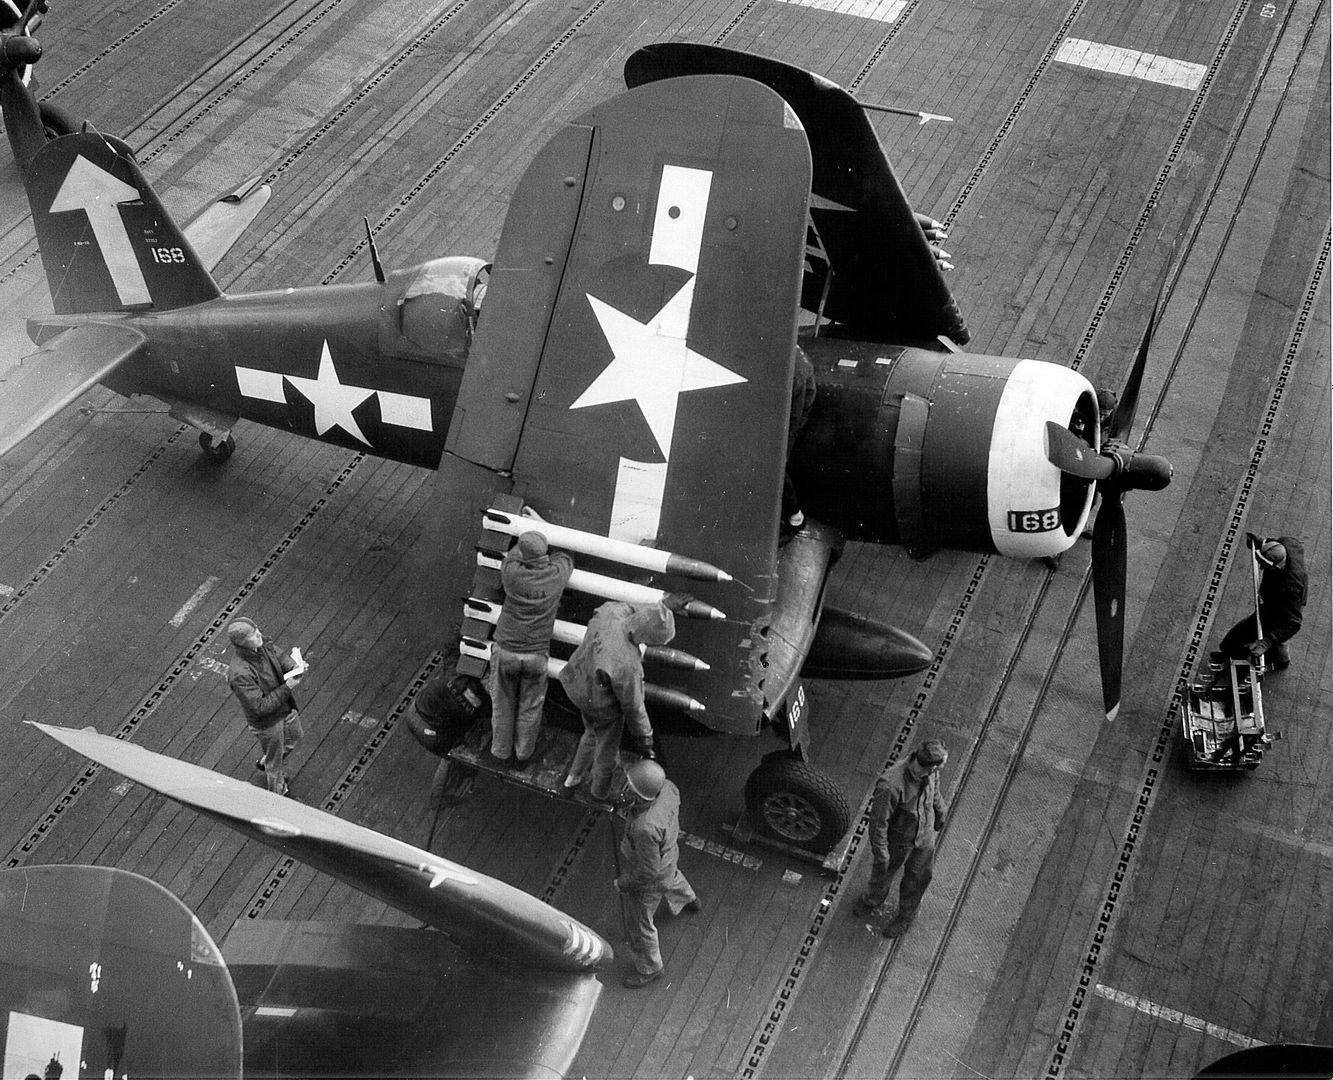 1D Corsair Of Fighting Squadron VF 84 On The Flight Deck Of USS Bunker Hill CV 17 In Preparation For A Mission Against Japanese Defenses On Okinawa 1945